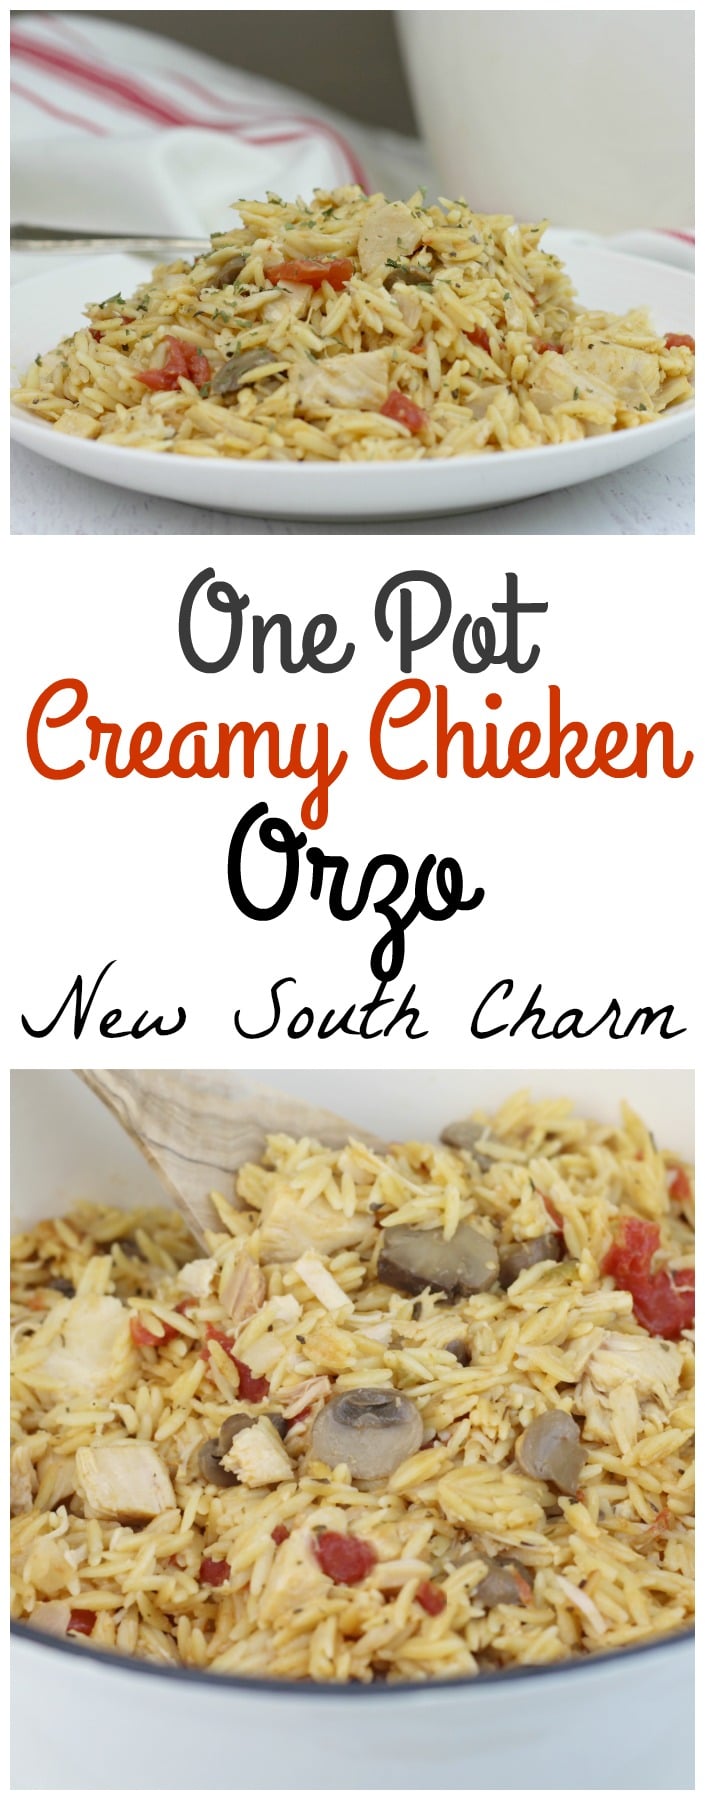 Just 30 minutes is all you need to make this easy One Pot Creamy Chicken Orzo. 